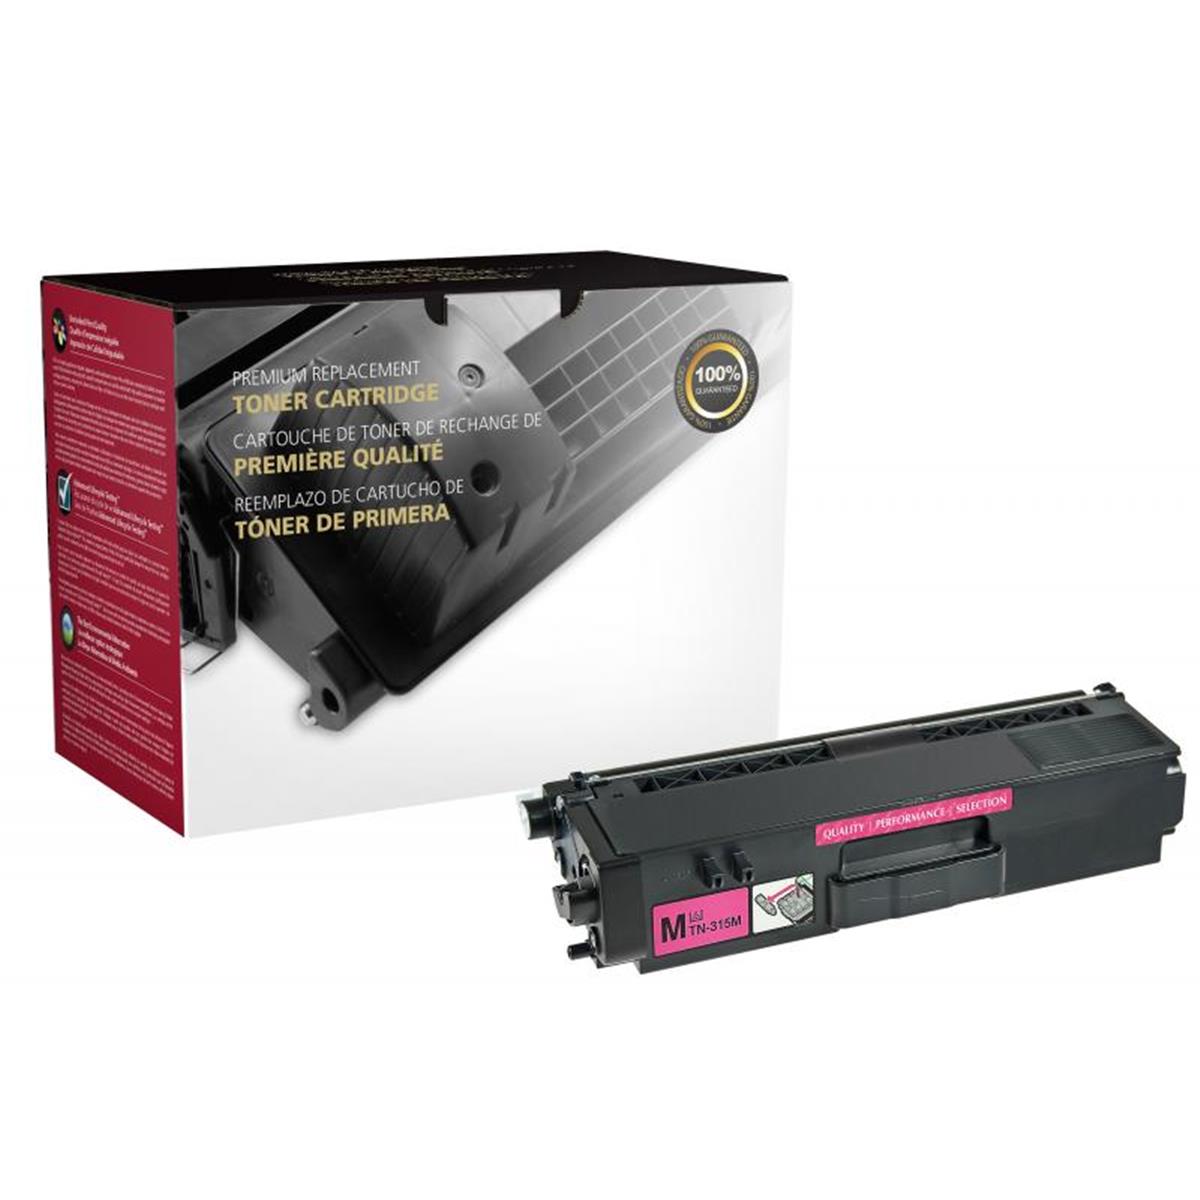 Picture of Brother 200594P Magenta Toner Cartridge for TN310